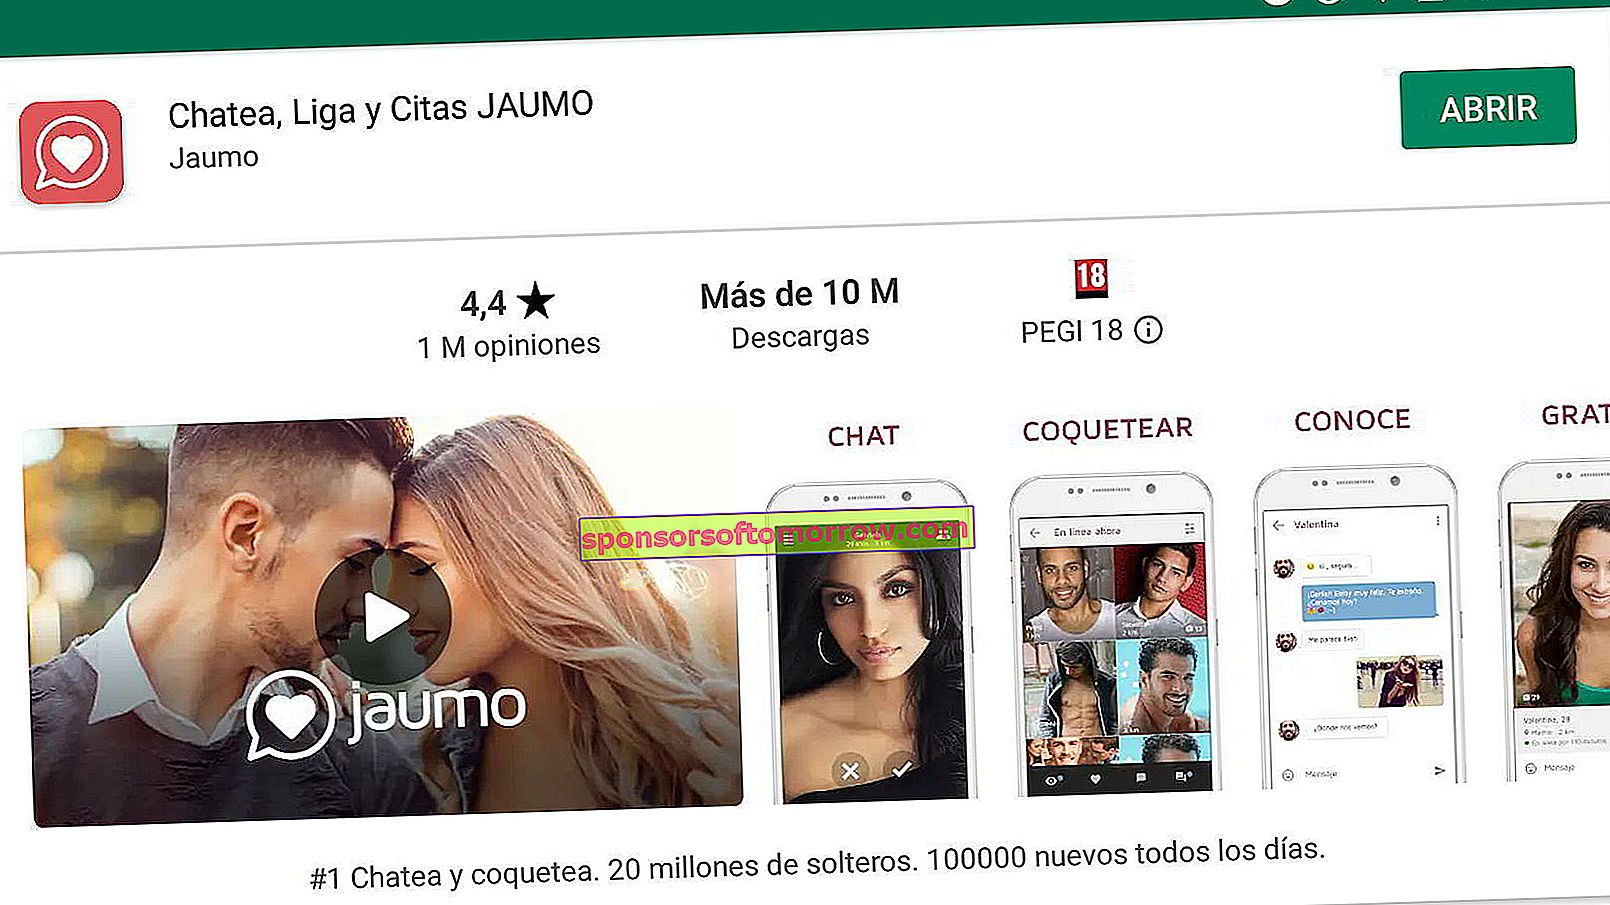 10 tips for Jaumo, the new dating app 7